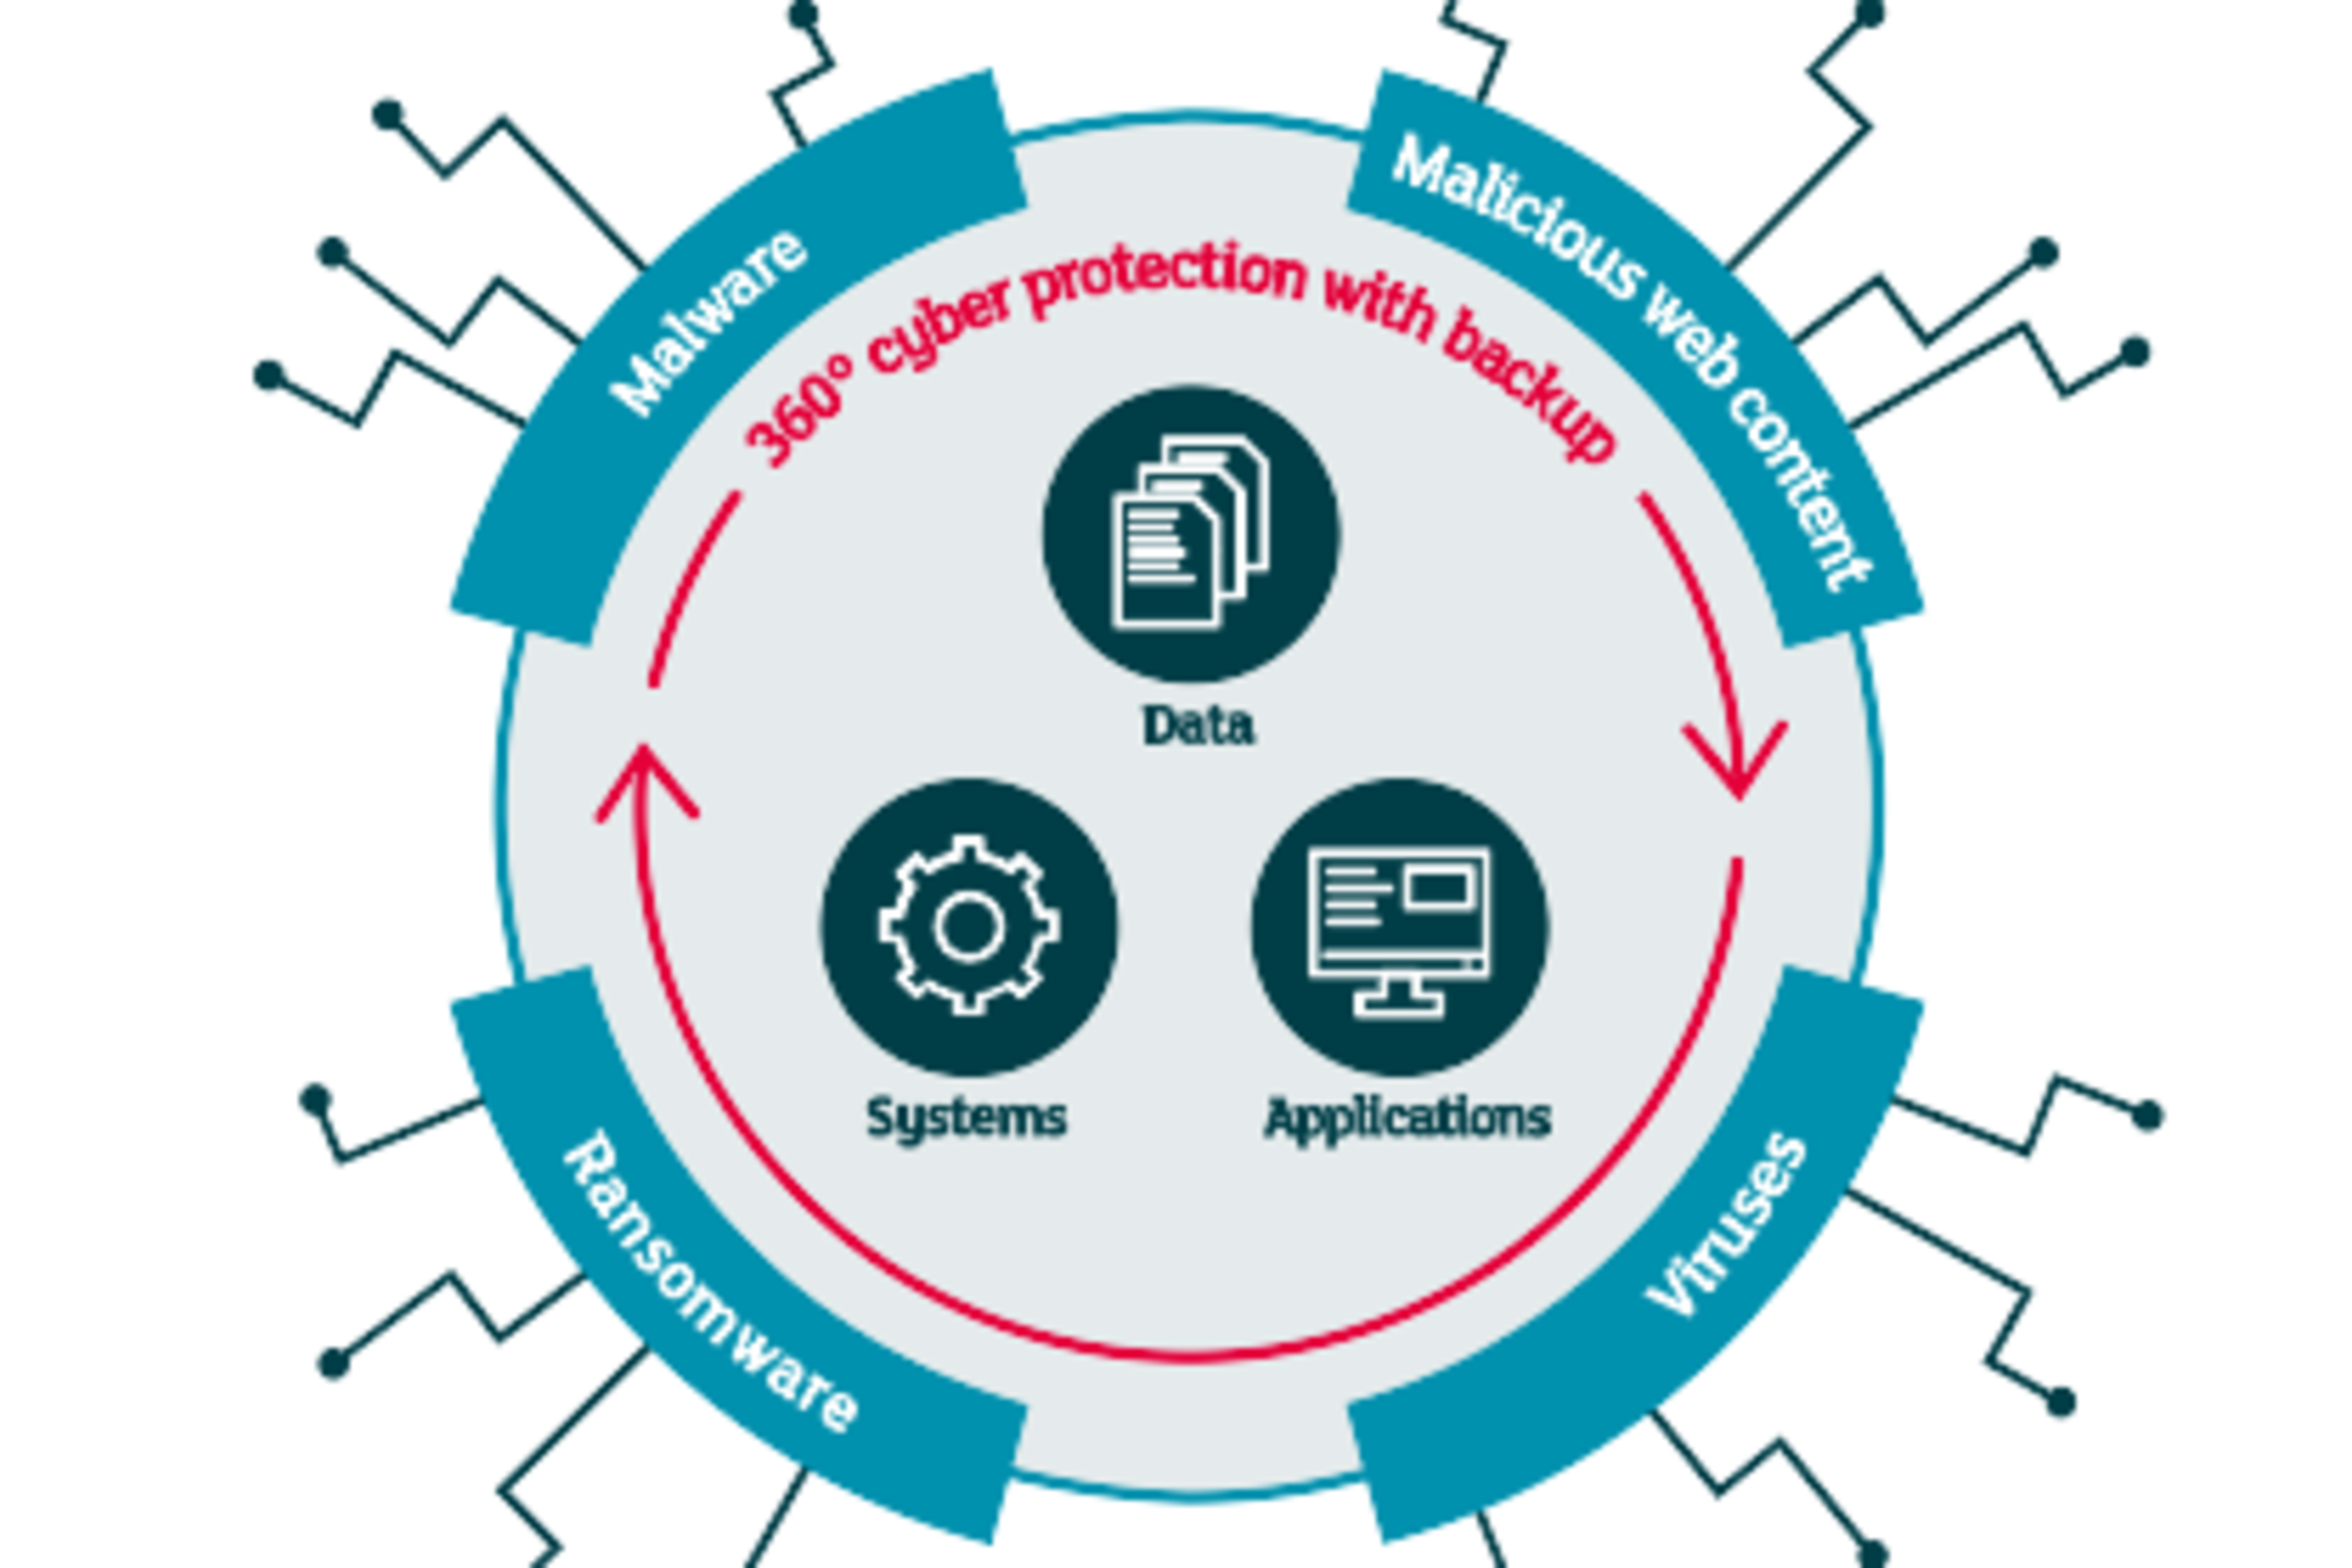 Graphic: 360° cyber protection with backup protects the data, systems and APplications from malware, malicious web content, viruses and ransomware.